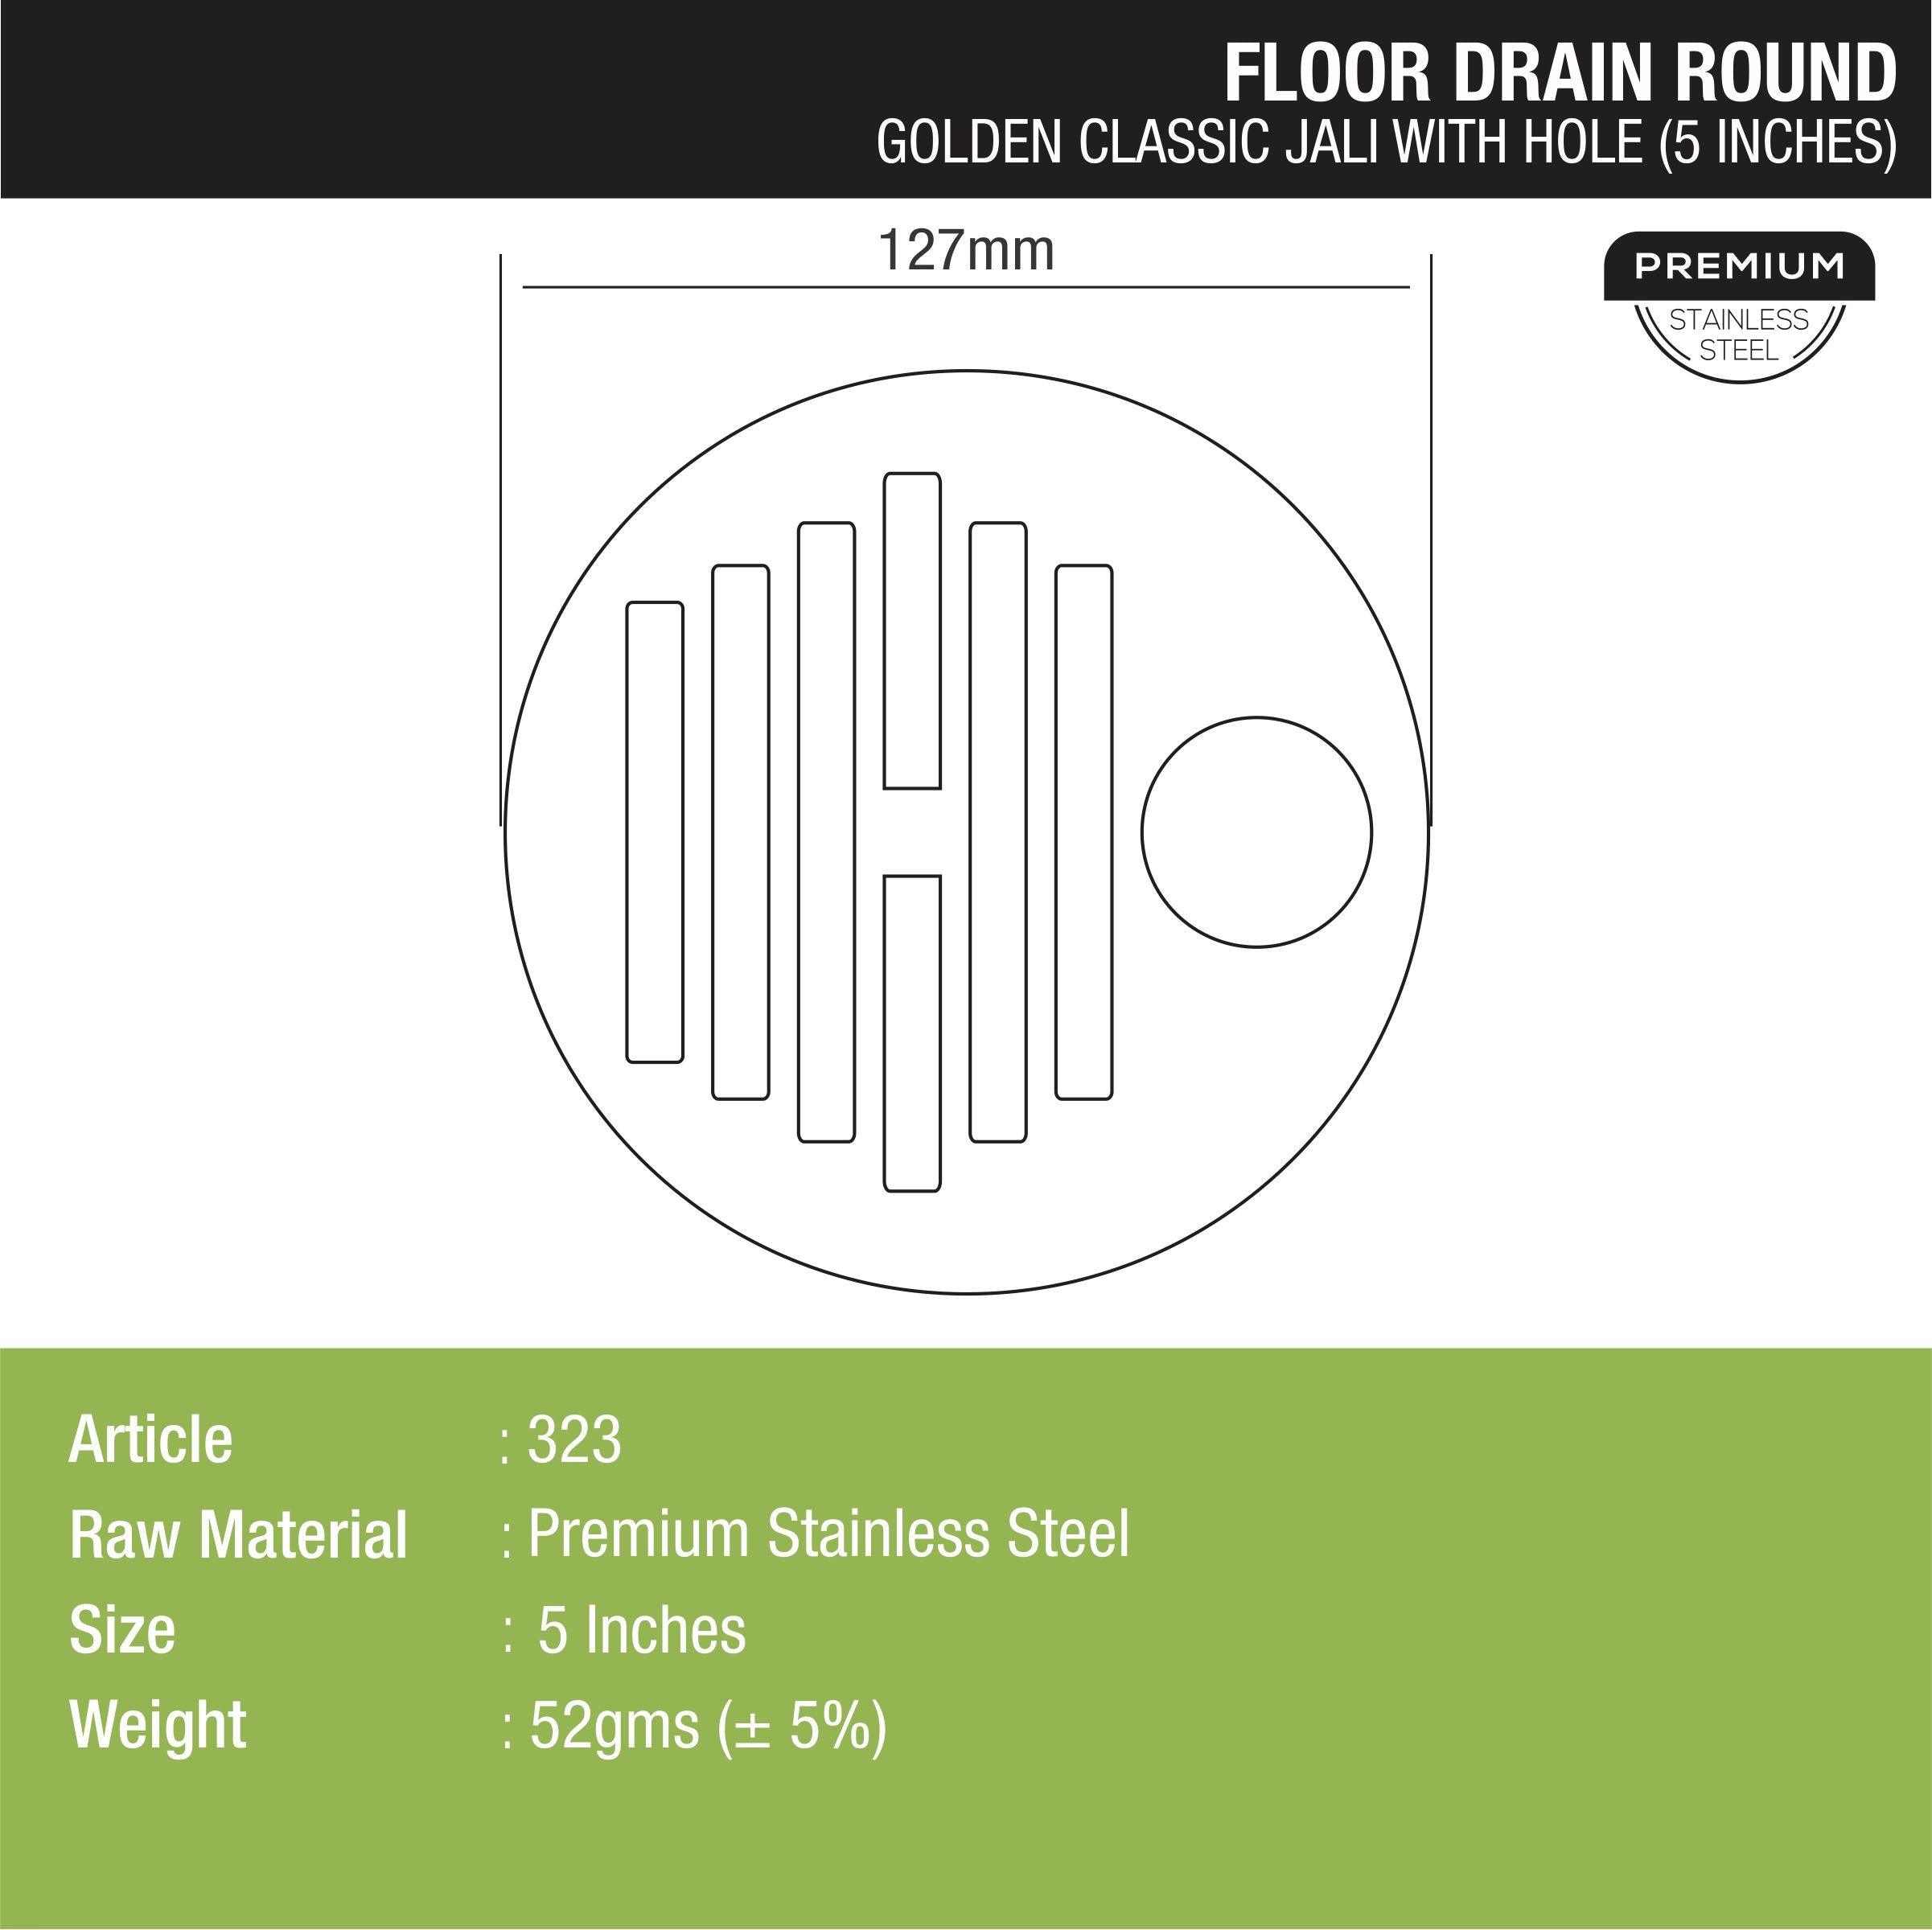 Golden Classic Jali Round Floor Drain with Hole (5 inches) dimensions and sizes